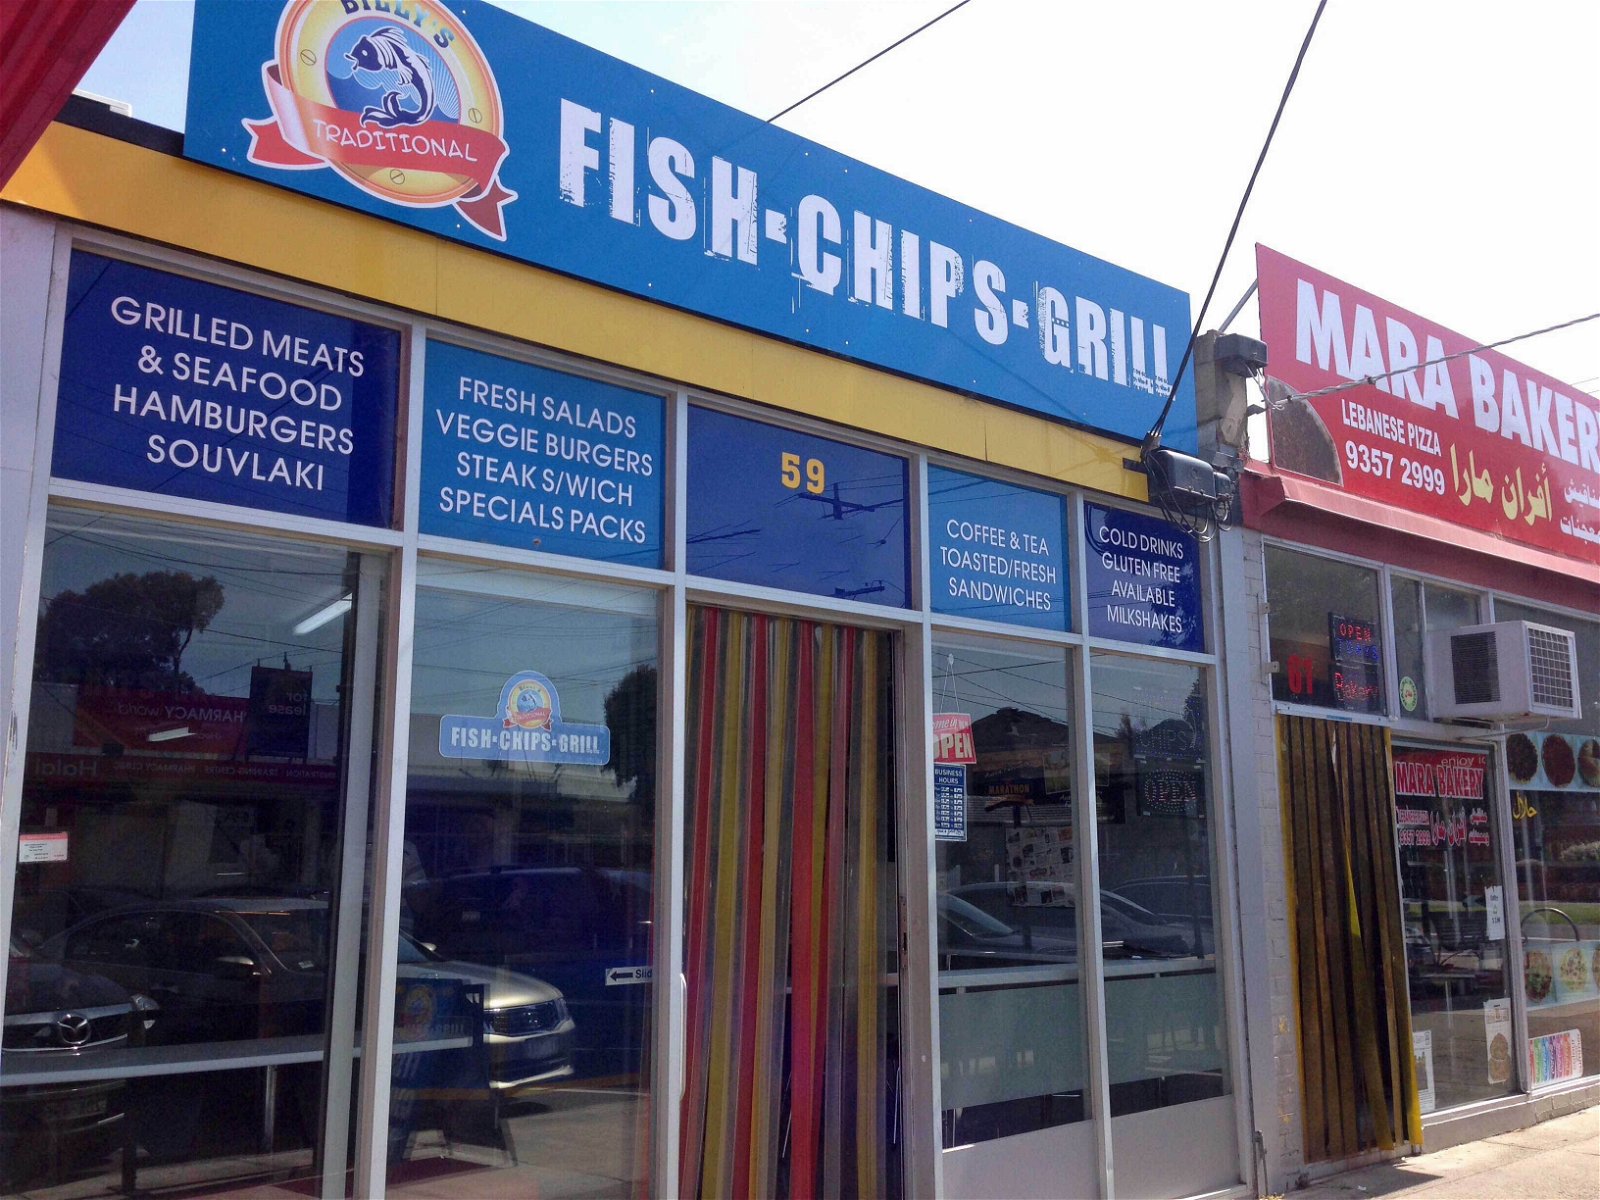 Billy's Traditional Fish Chips Grill - Food Delivery Shop